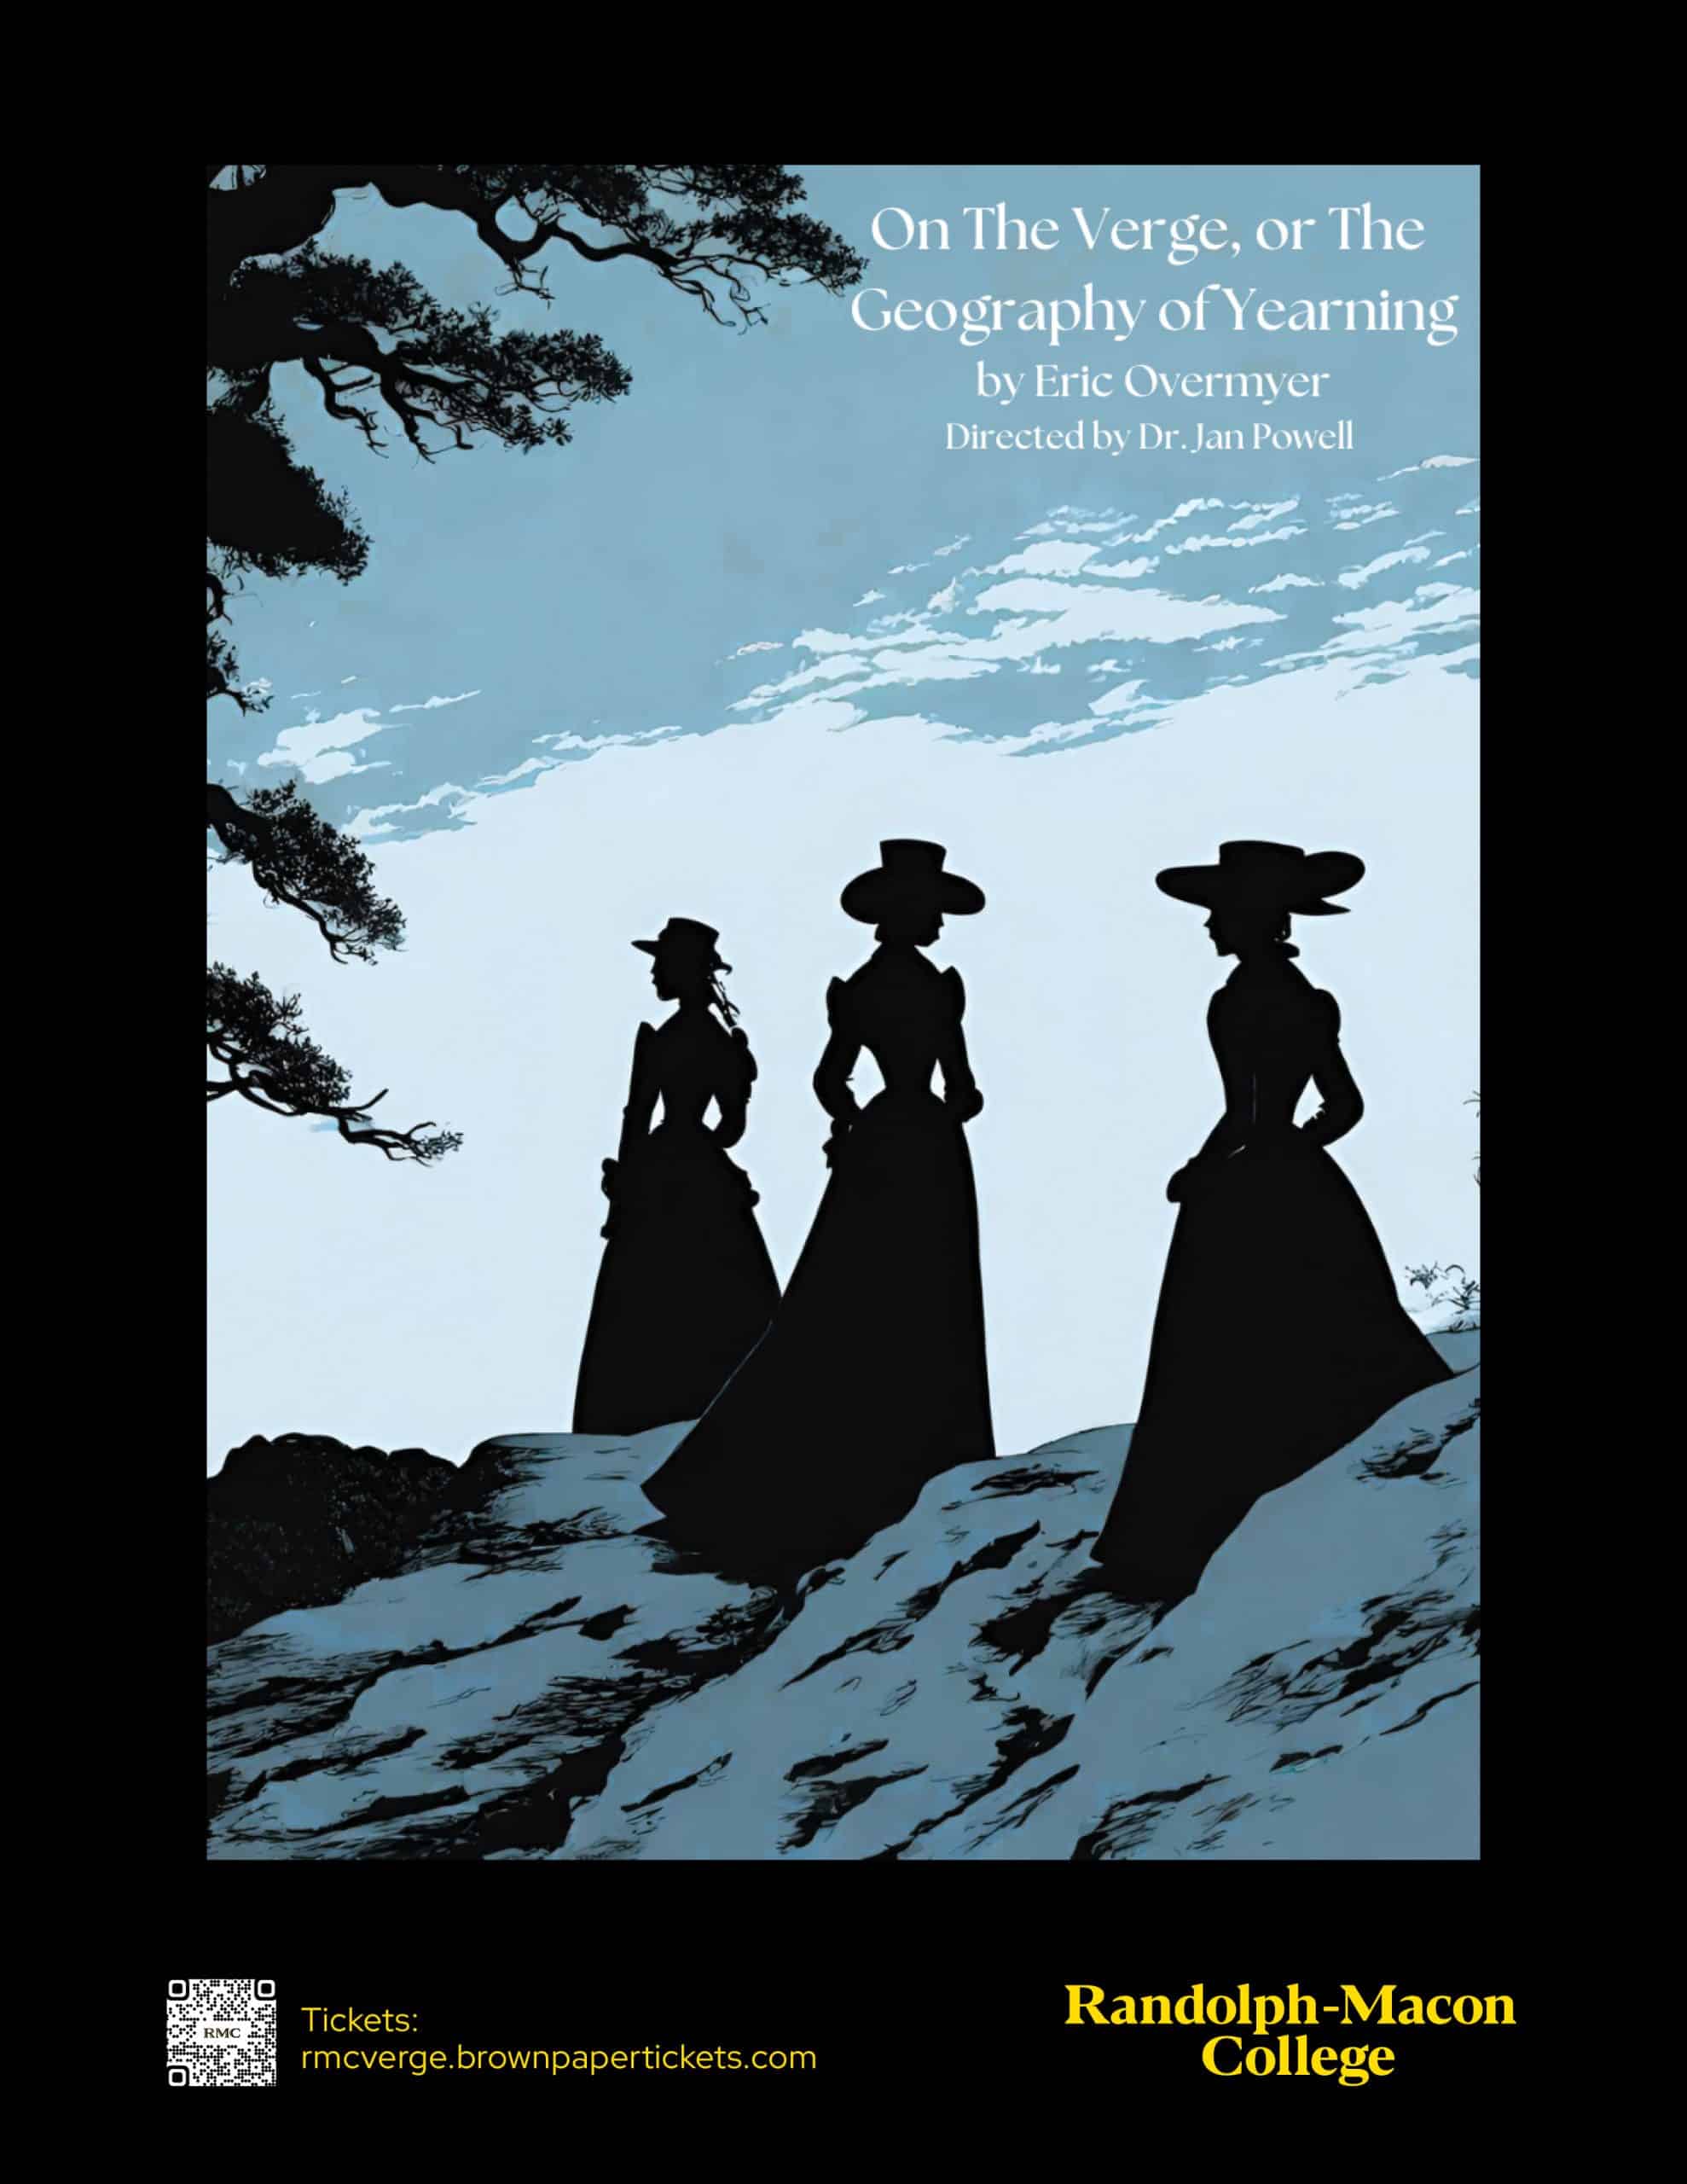 A flyer for the RMC Theater production of "On The Verge" featuring the silhouette of 3 Victorian women in hats..